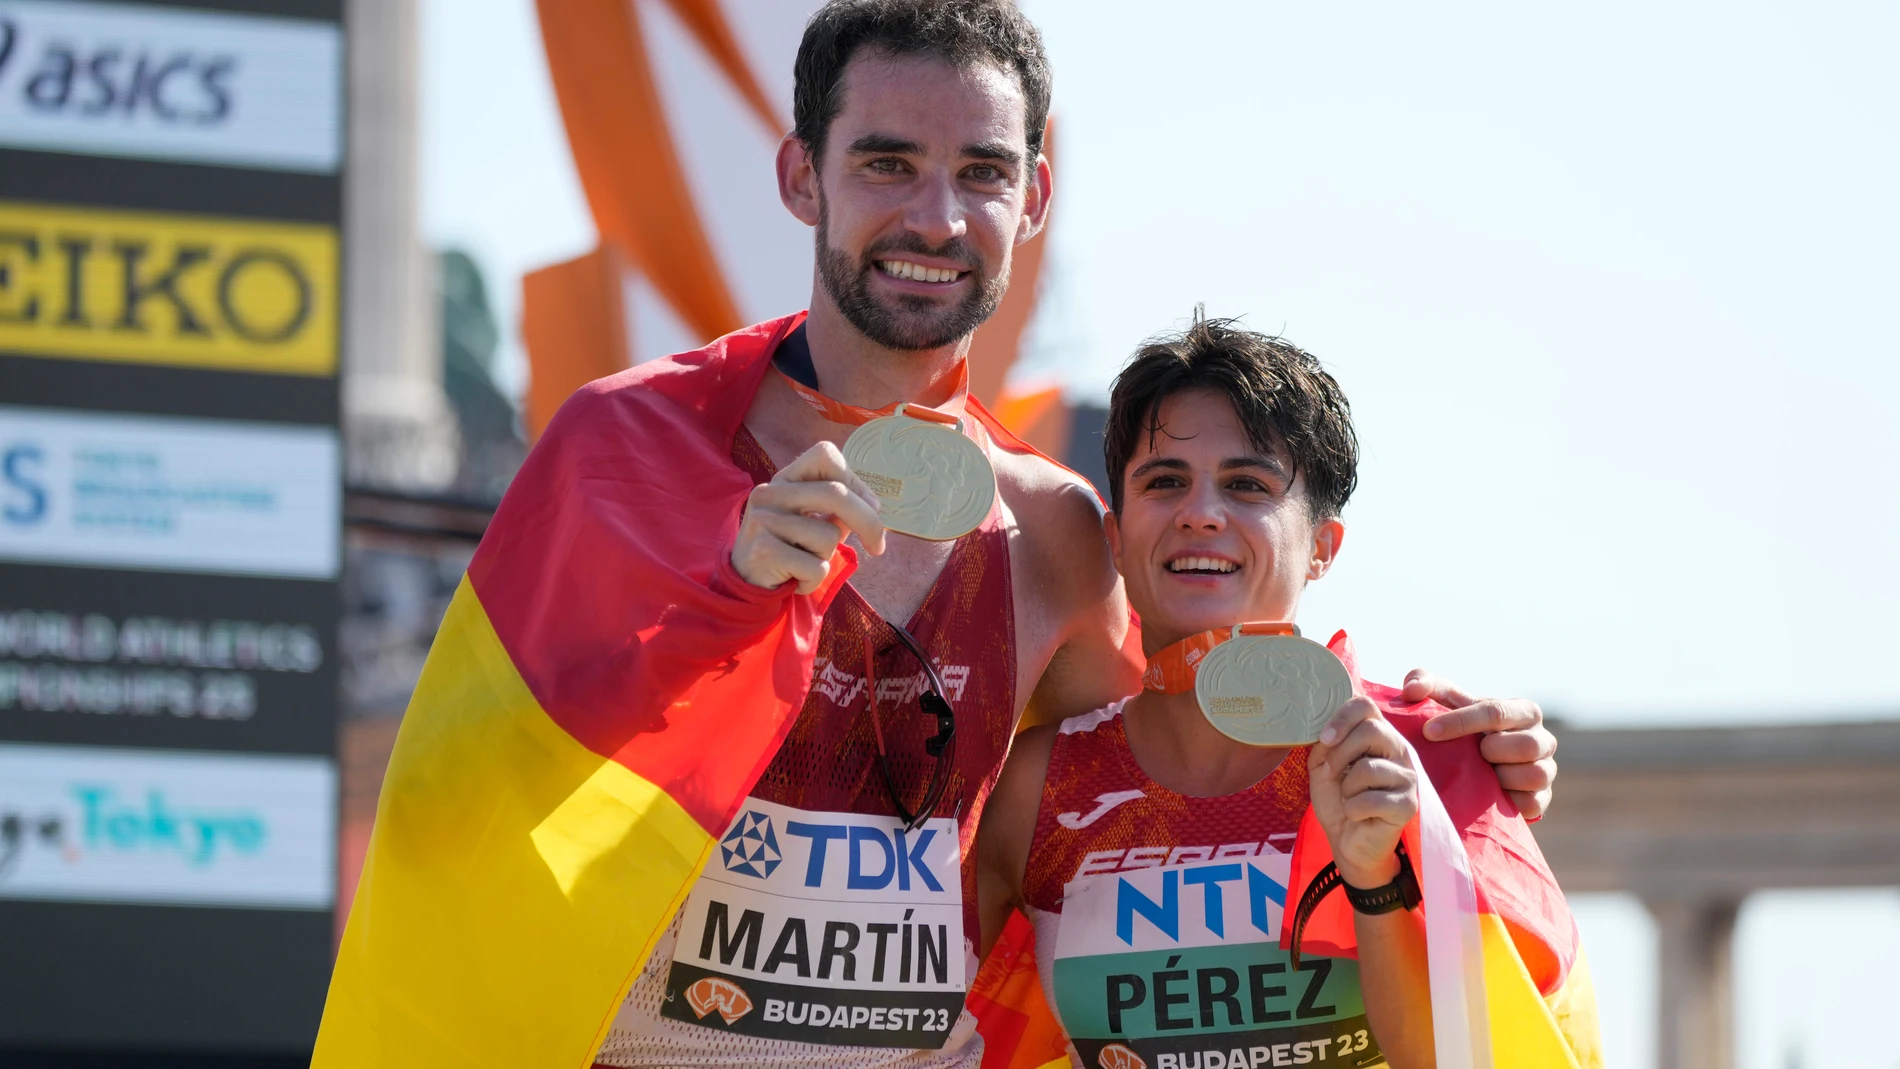 Alvaro Martin, of Spain, and his compatriot María Perez show their gold medals after winning the men's and women's 35-kilometer race walk during the World Athletics Championships in Budapest, Hungary, Thursday, Aug. 24, 2023. (AP Photo/Ashley Landis)